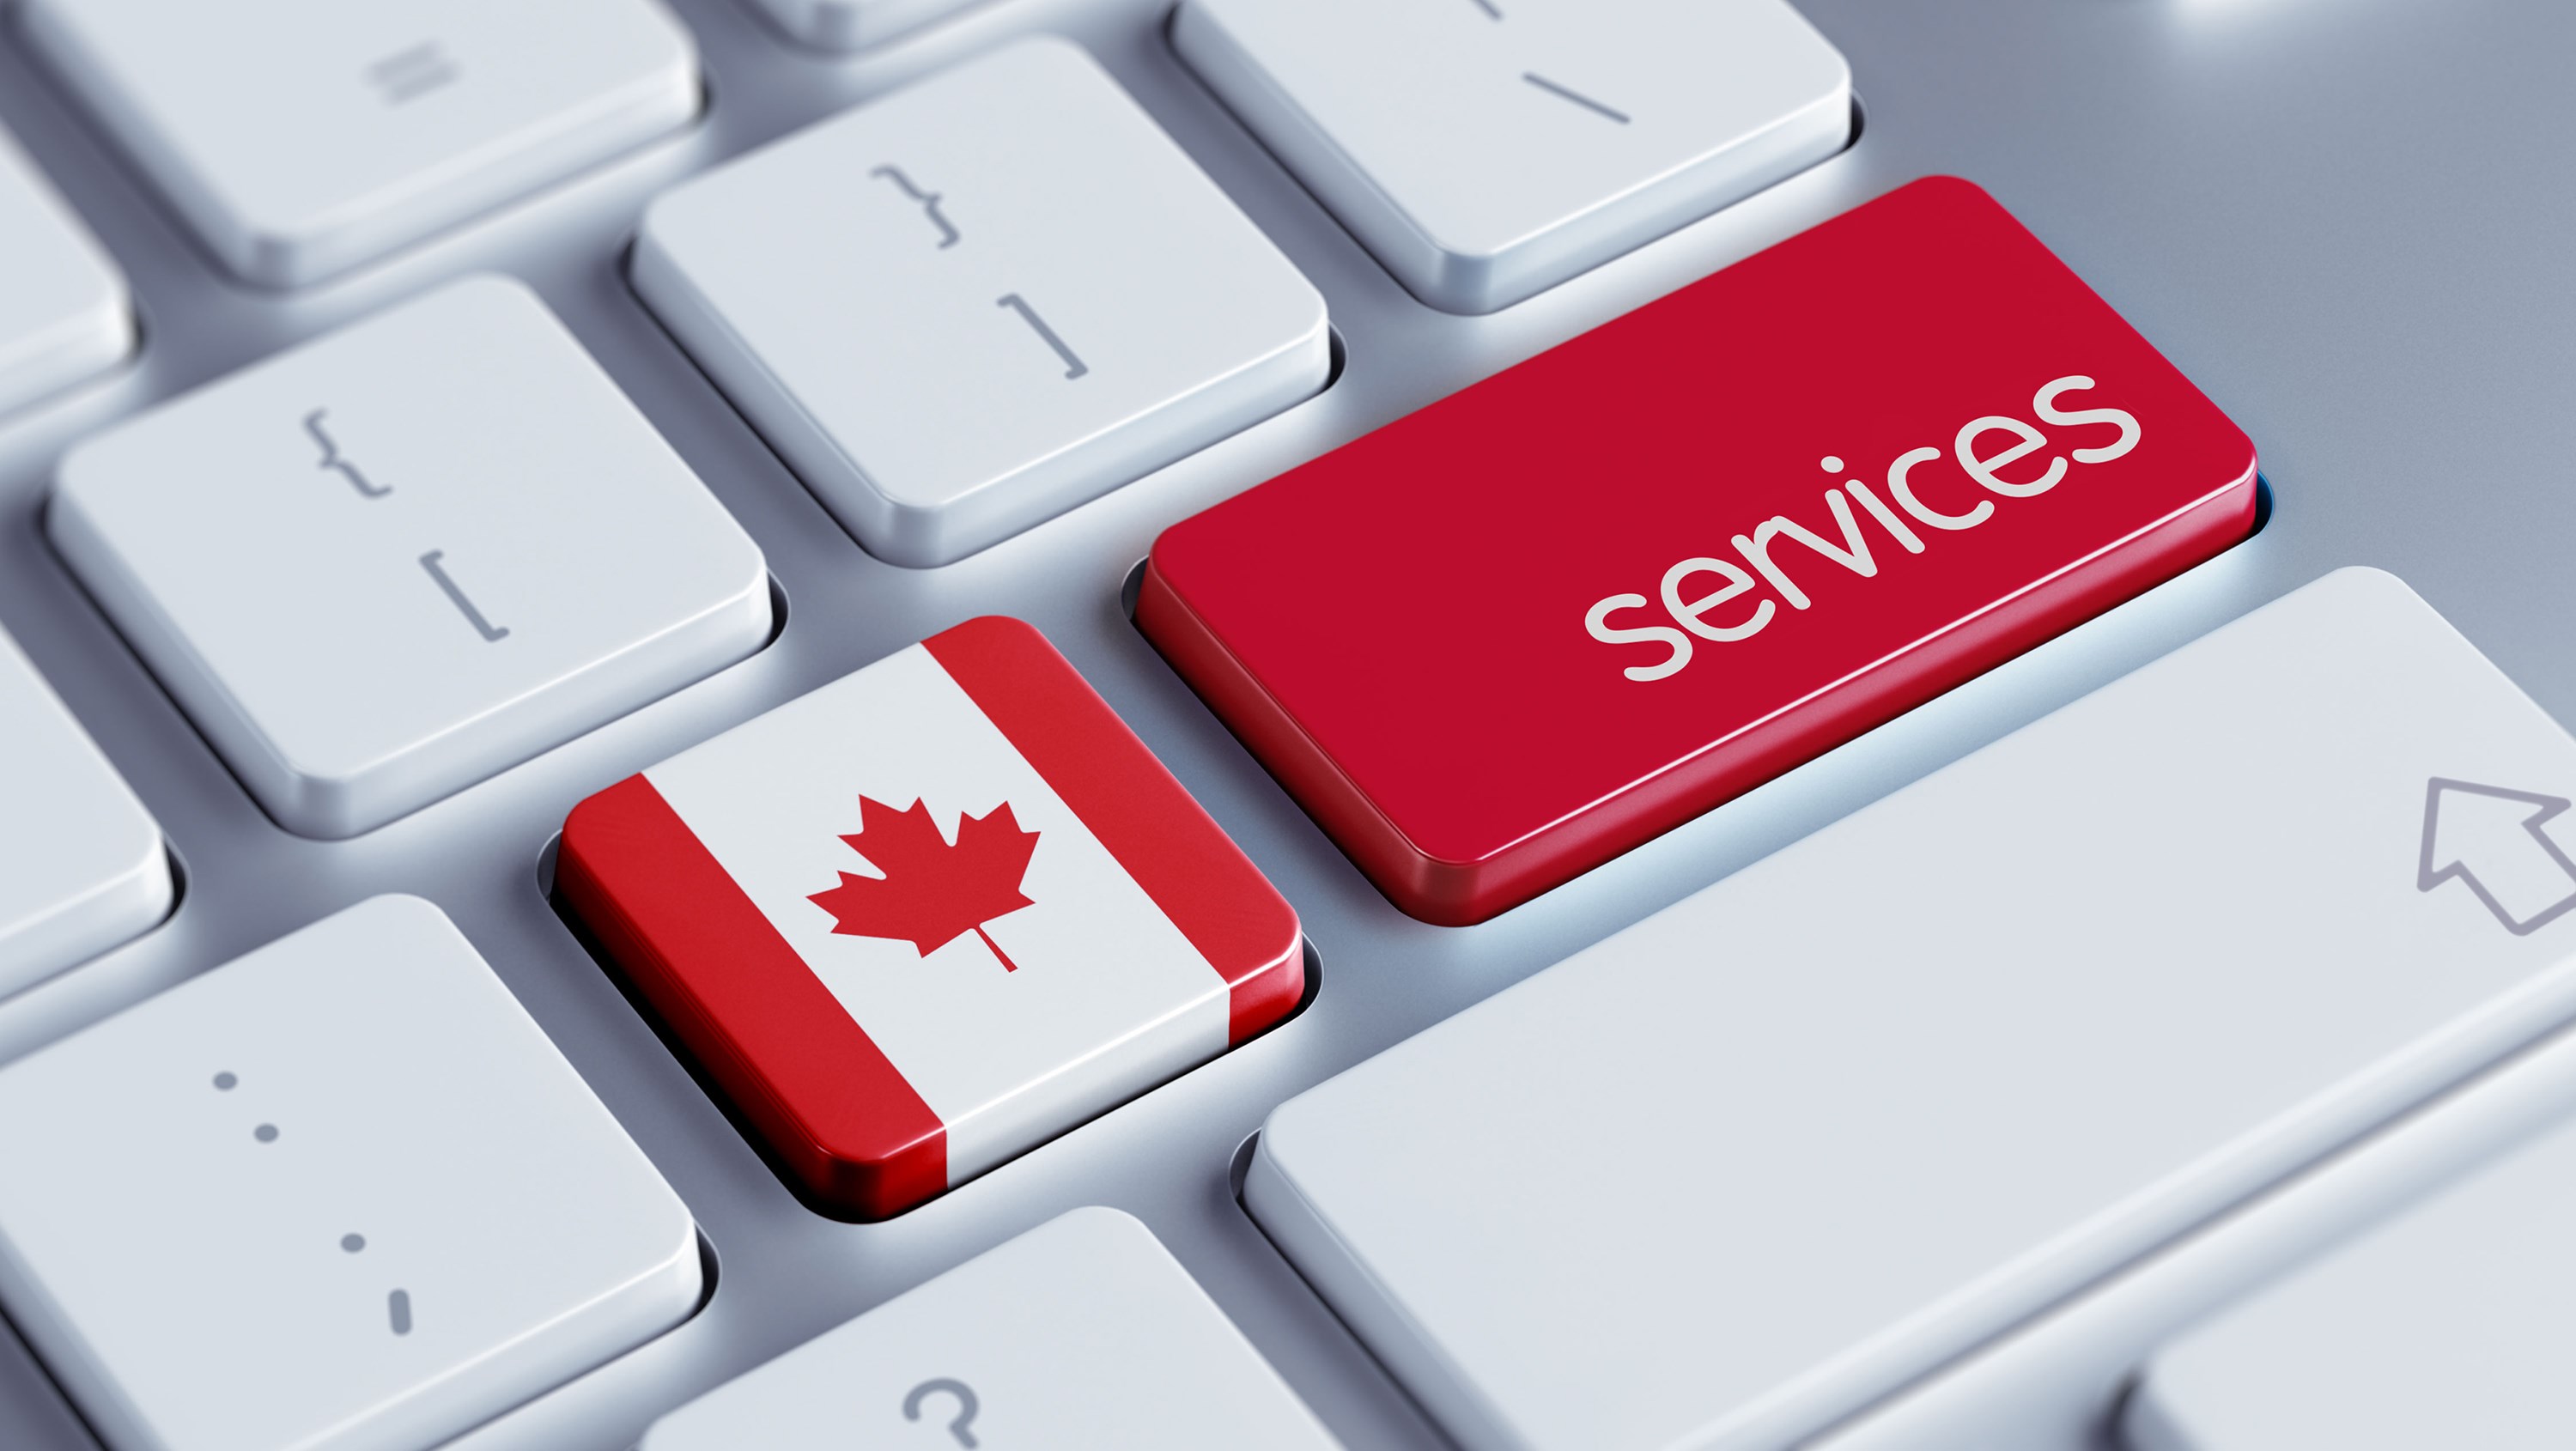 A white and silver keyboard containing two special keys: a square one with the Canada flag and a rectangular, red one with the word “services.”